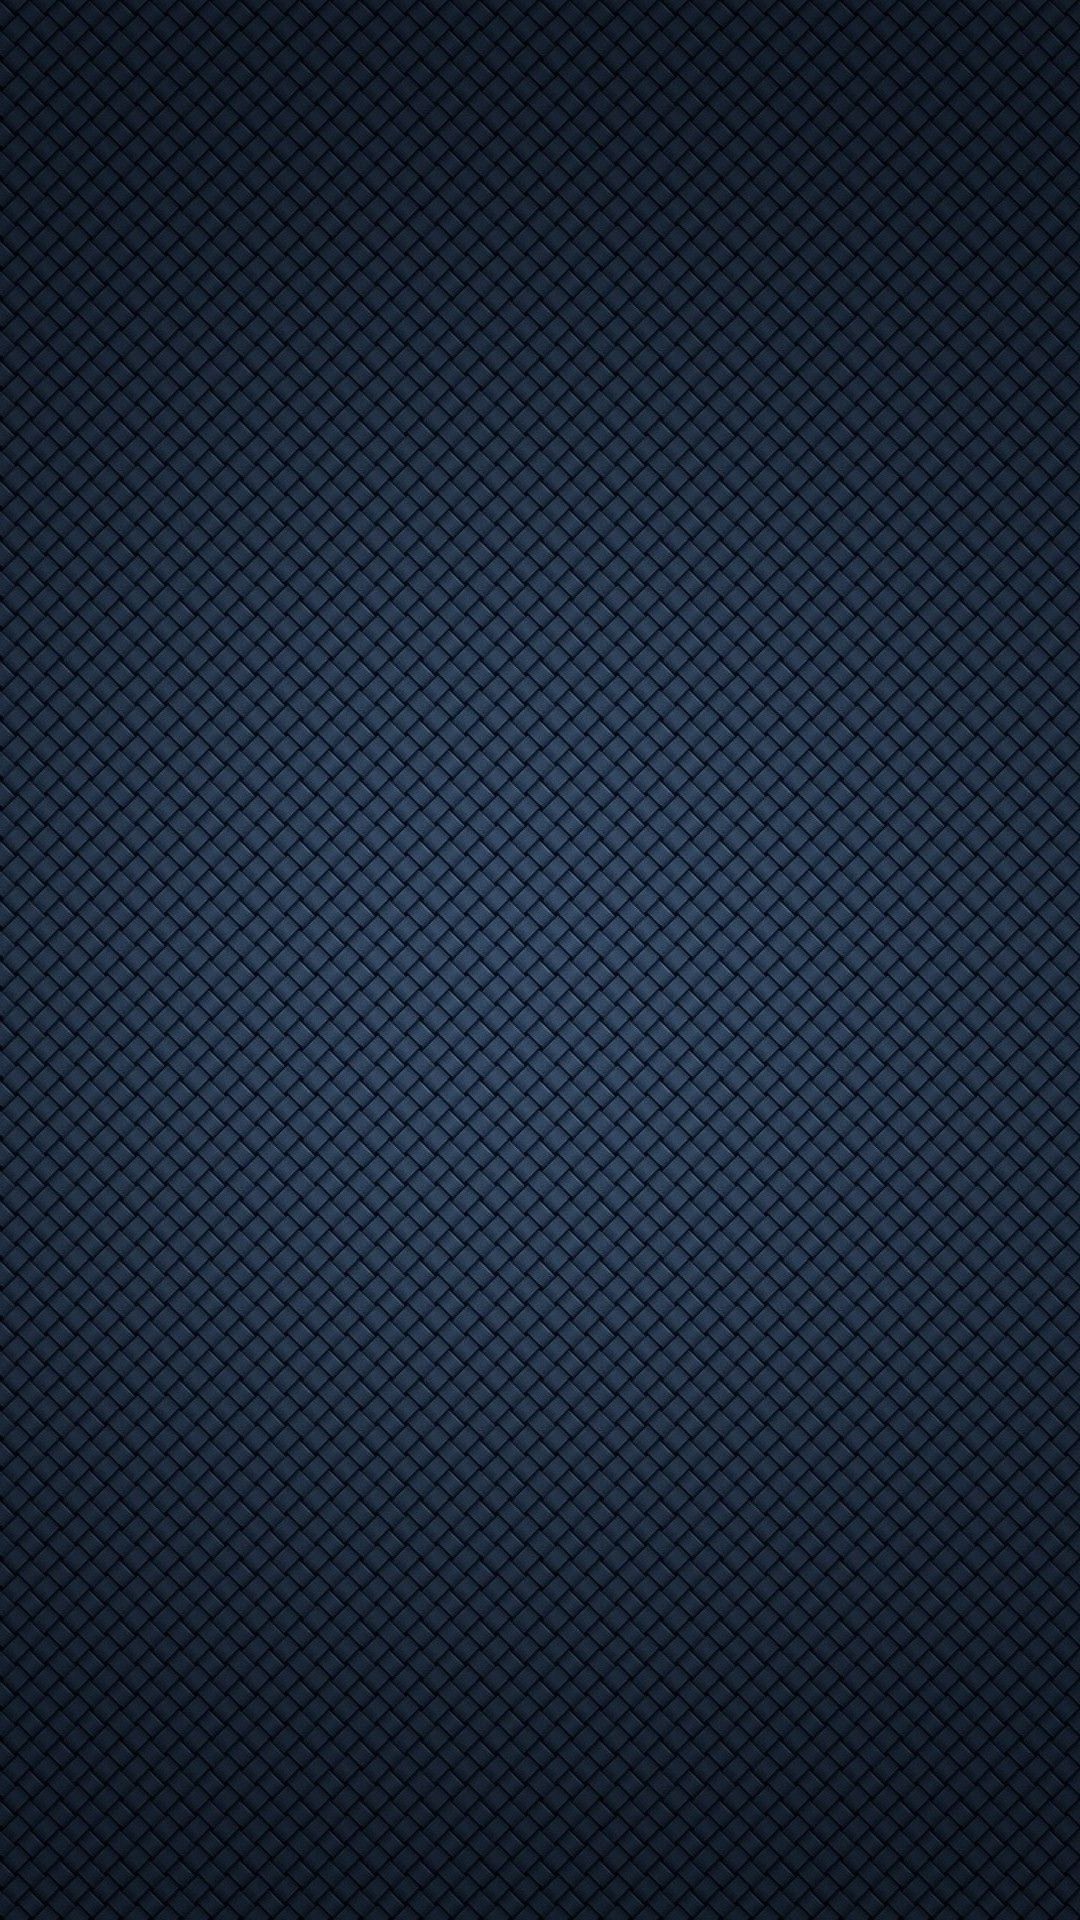 Android Blue Background. Blue Wallpaper, Cute Blue Wallpaper and Blue Christmas Wallpaper